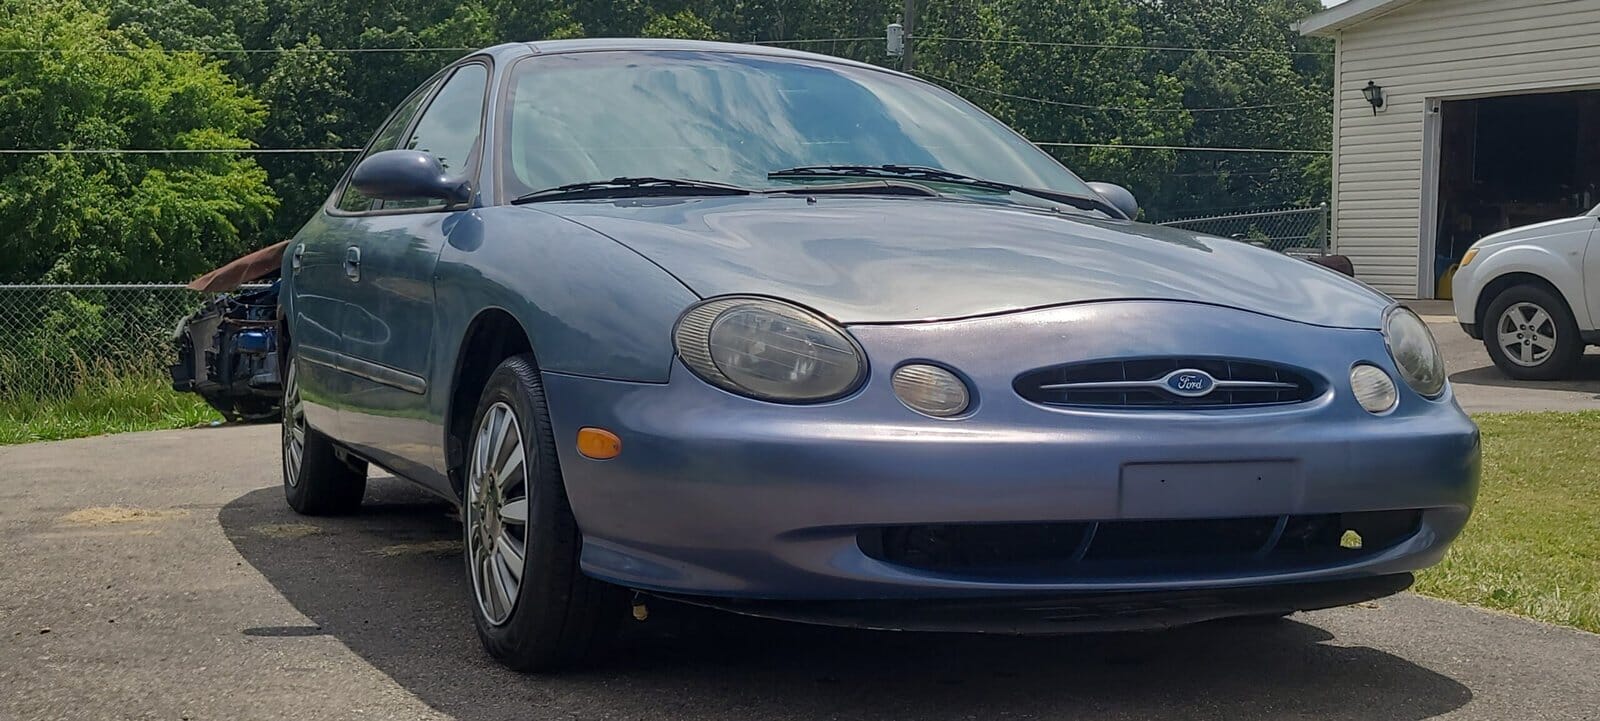 Read more about the article ***SOLD***1999 Ford Taurus SE***SOLD***